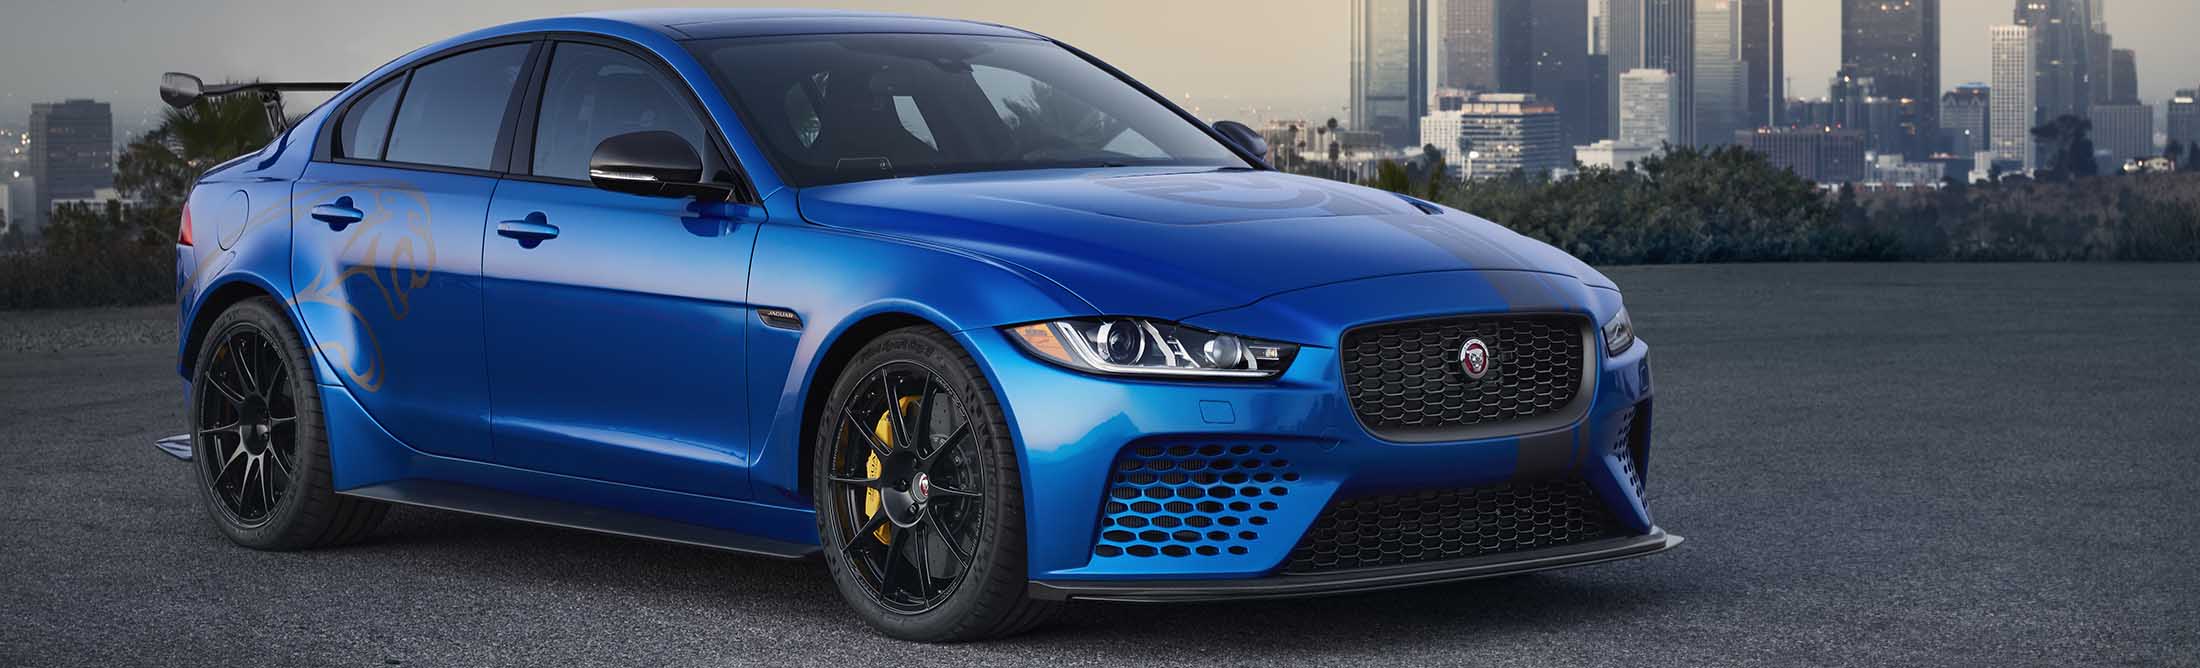 There are 300 horsepower sporty versions of the Jaguar XE and XF